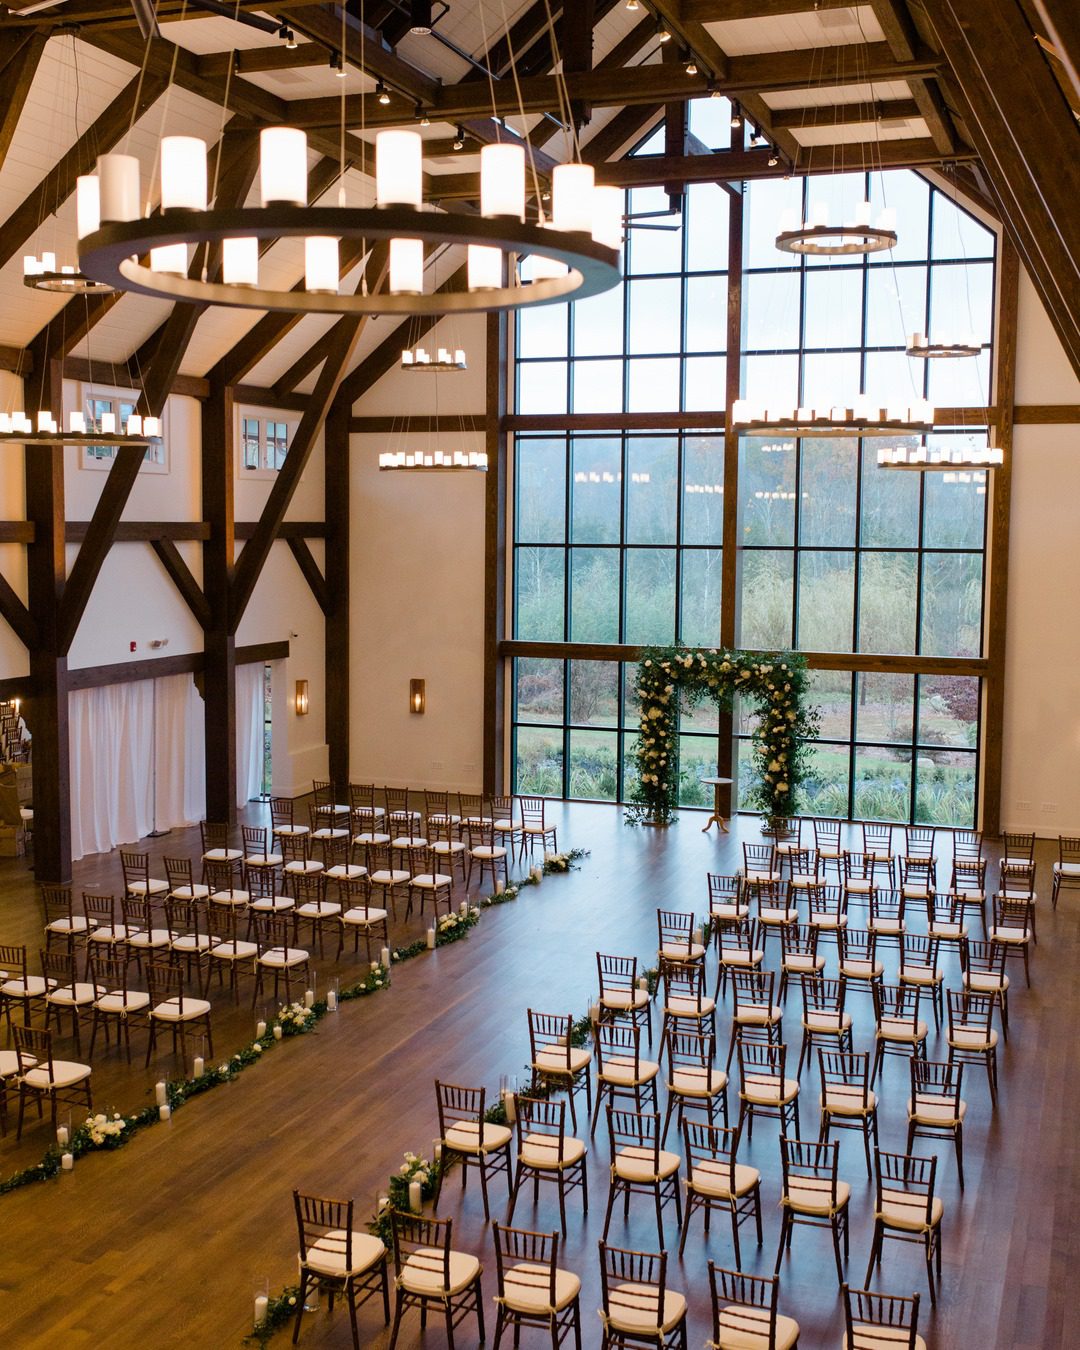 Blue Ridge Timberwrights - Crossed Keys Estate main hall with wedding arch and seating for guests